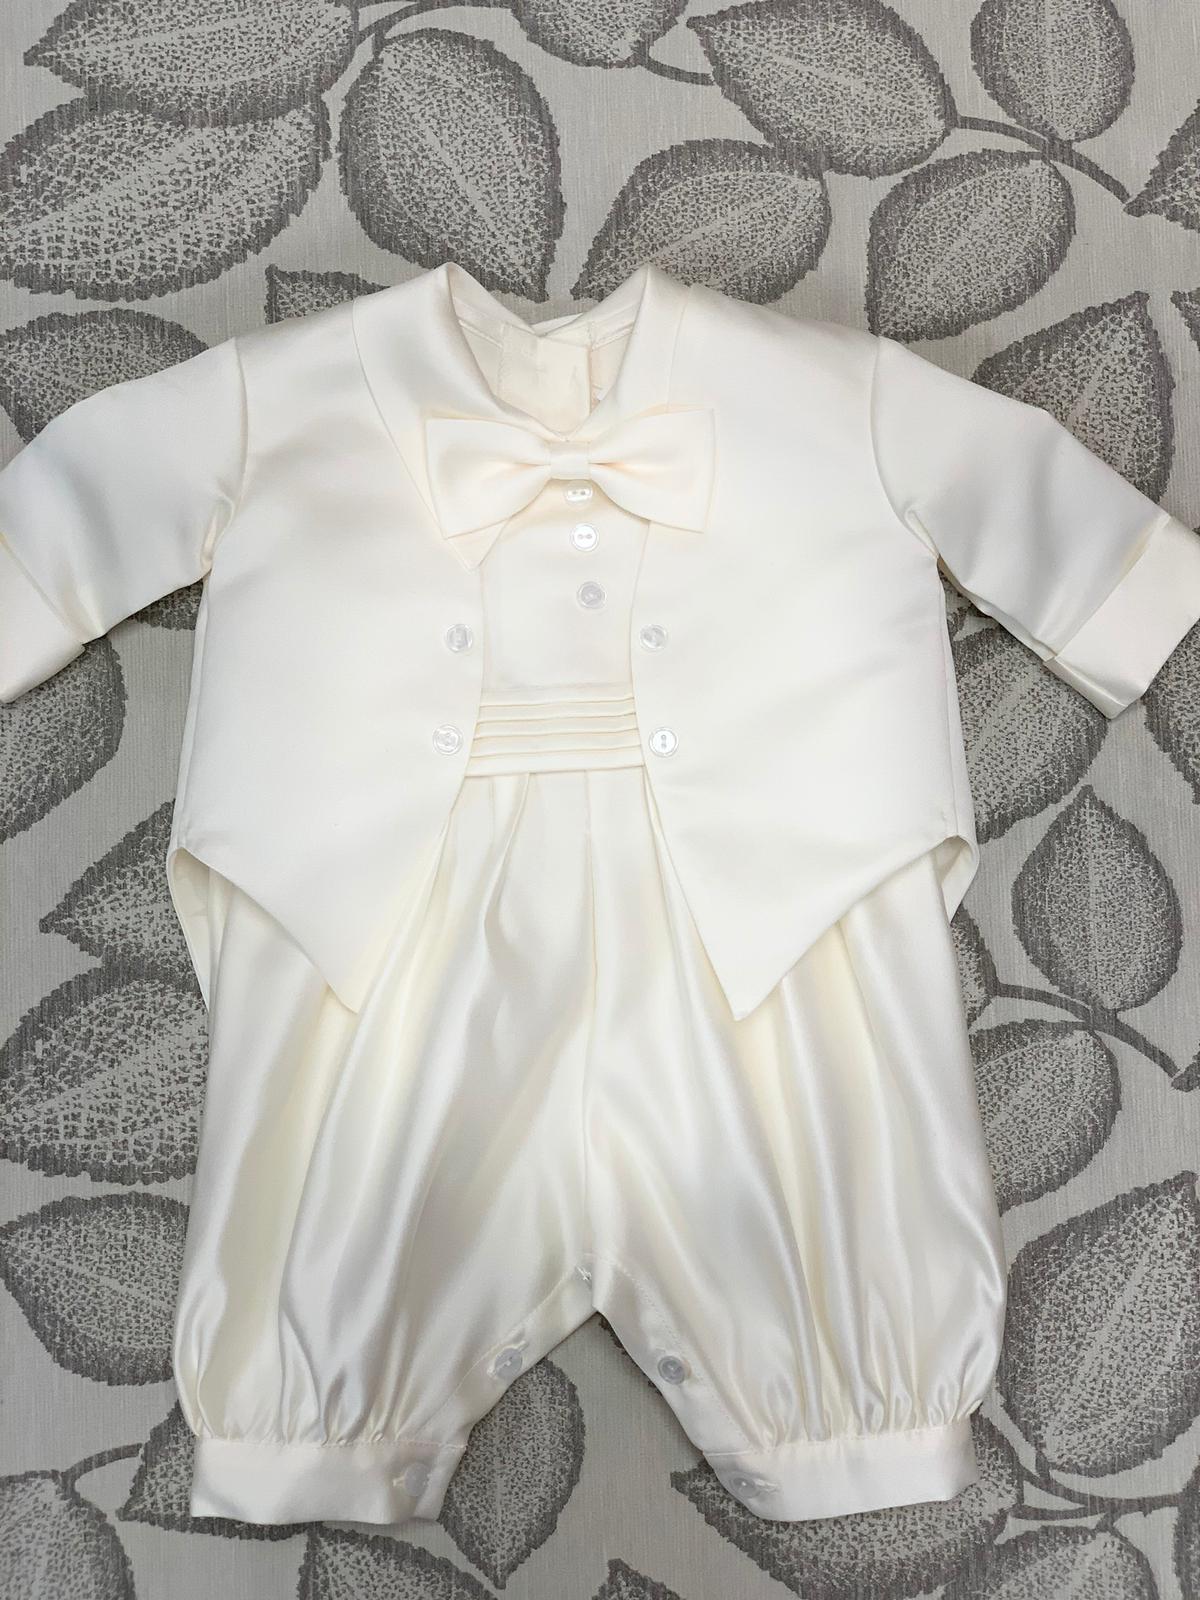 Boys Christening Outfits 